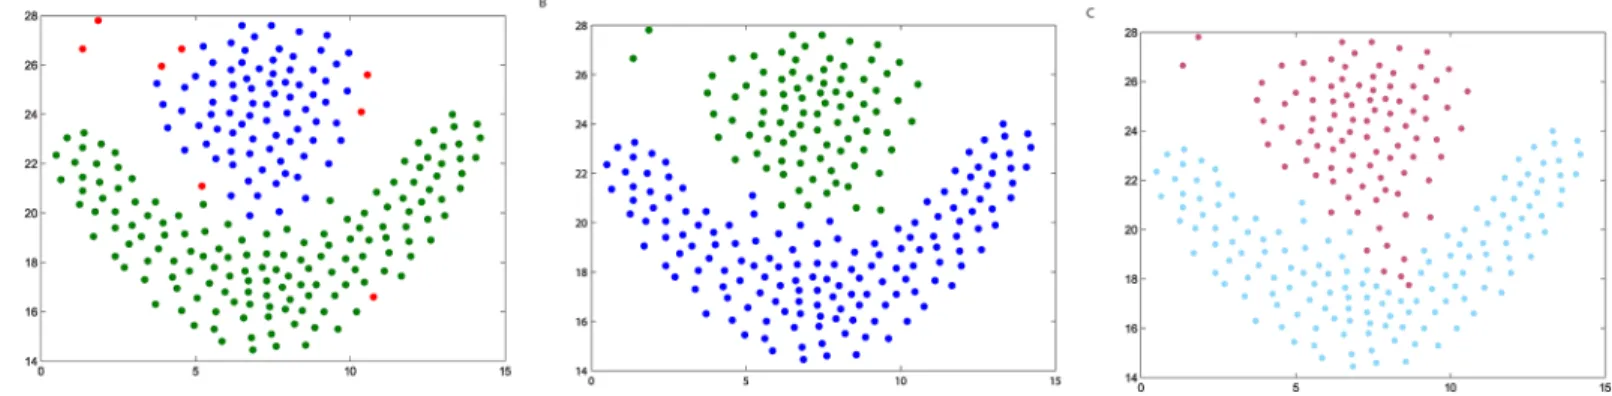 Fig 8. The clustering results of DBSCAN, DP Clustering and DPAM using Flame dataset. (A) DBSCAN (MinPts = 1, Eps = 6), (B) DP (percent = 5), (C) DPAM.